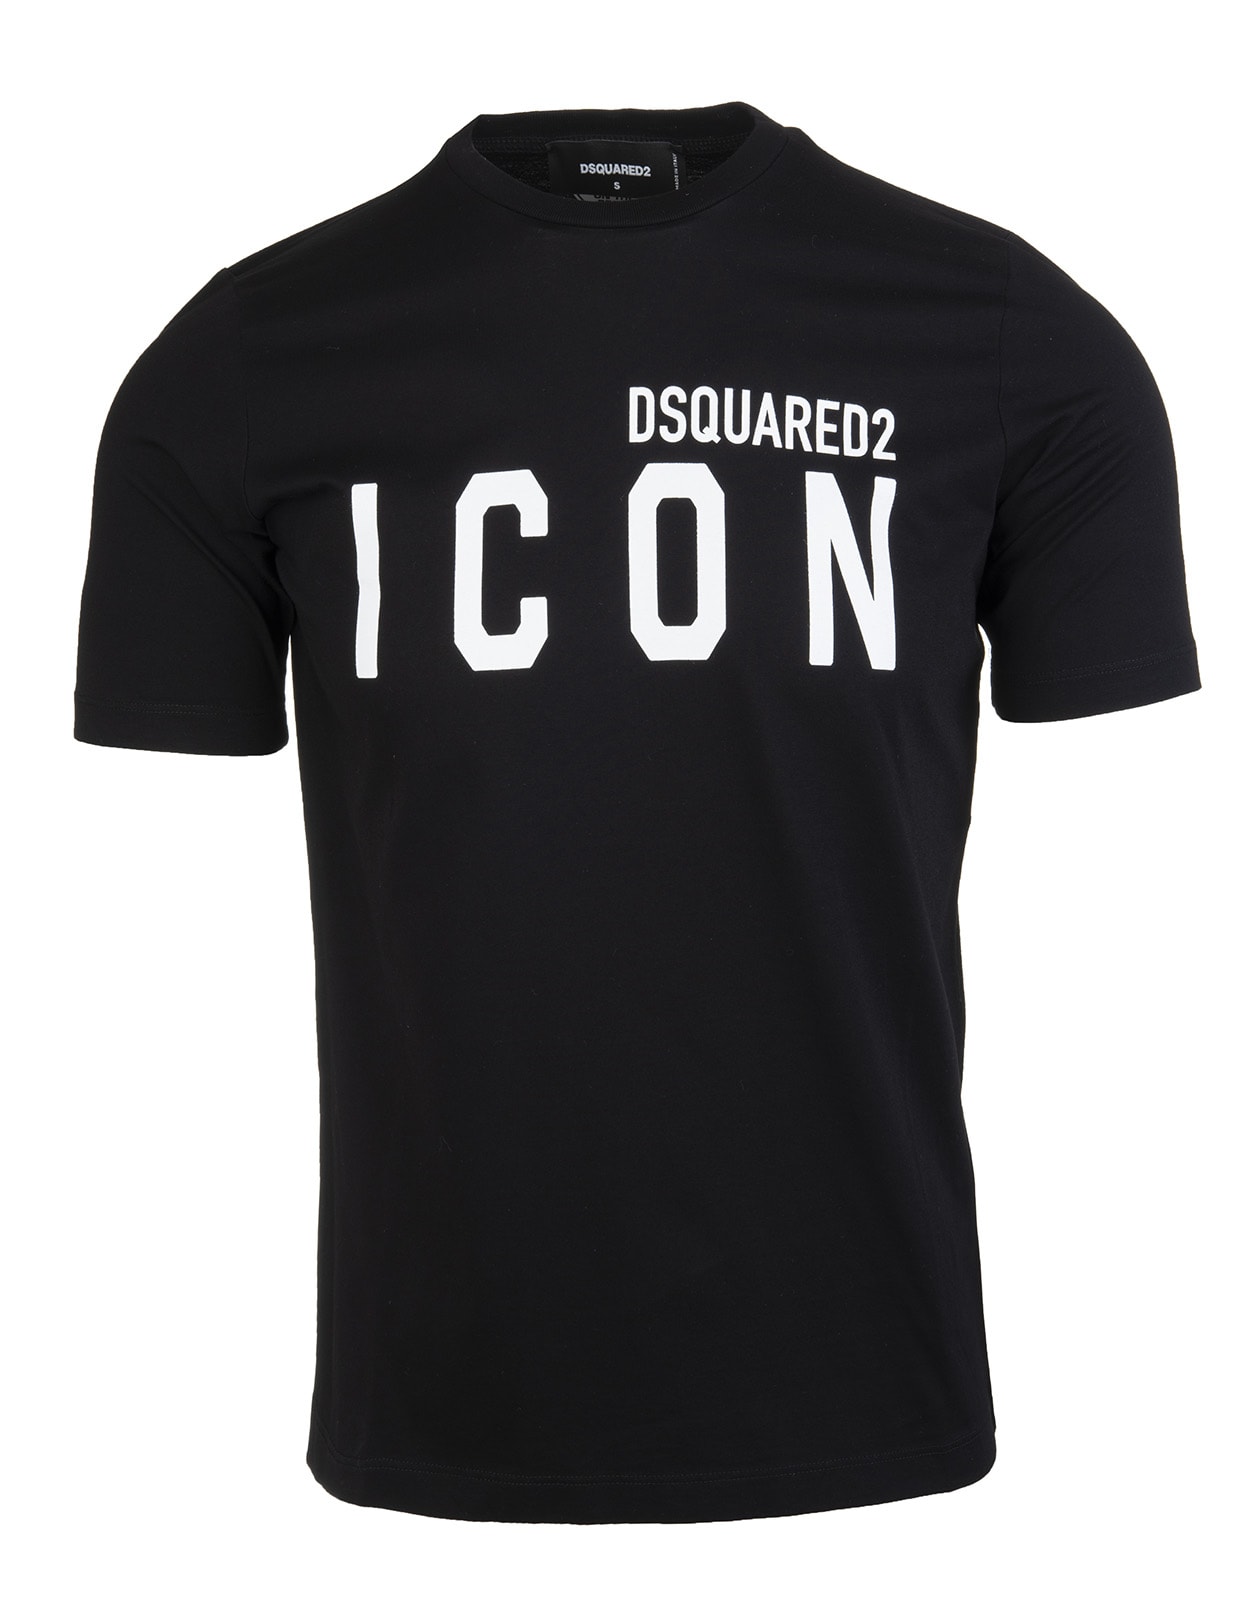 Dsquared2 Woman Black And White Icon T-shirt